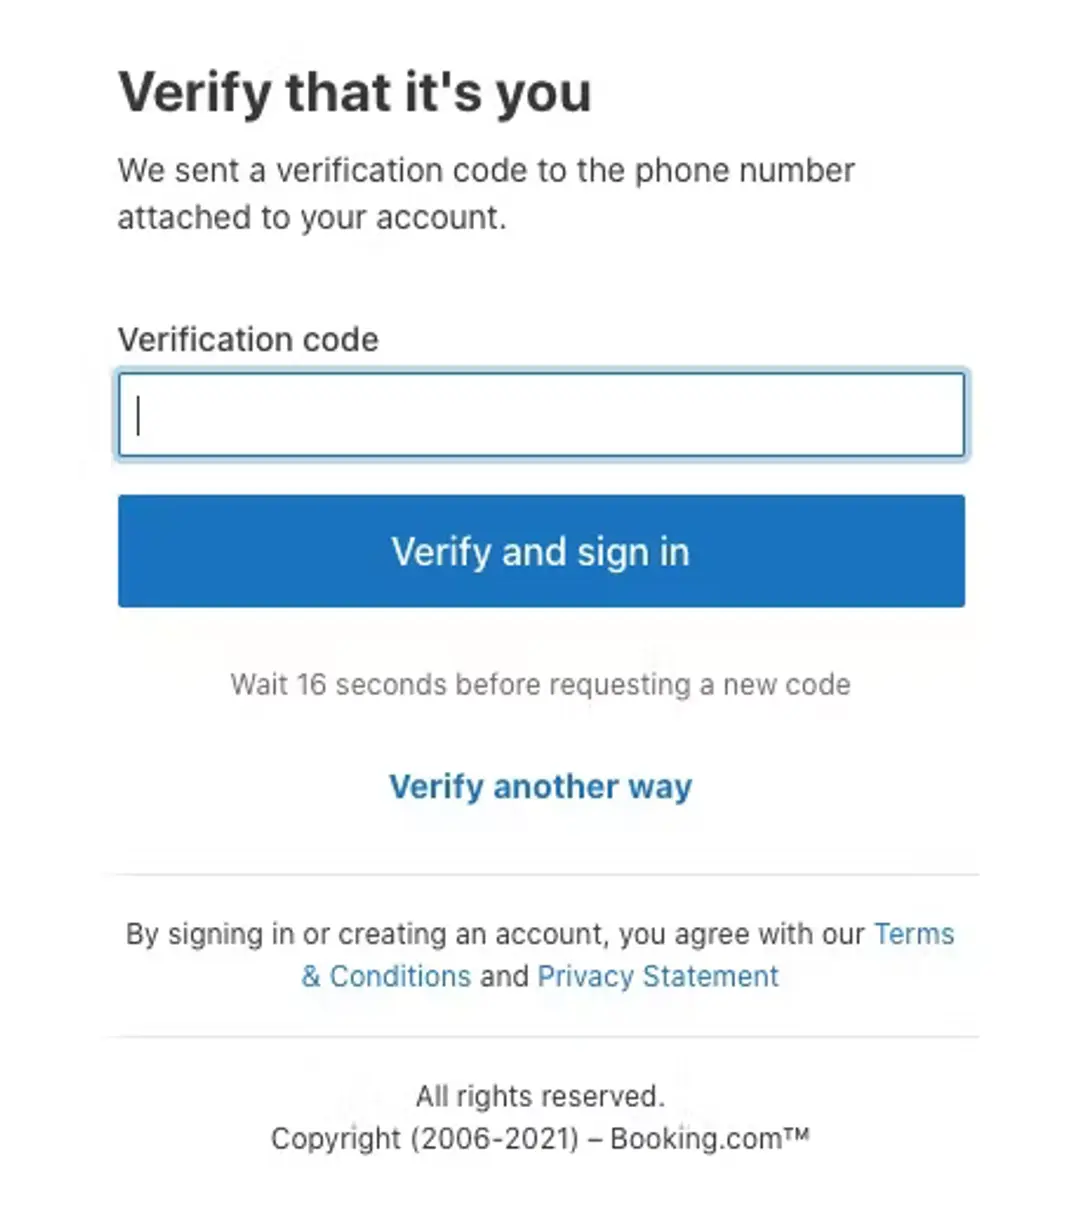 The verification code view on Booking.com